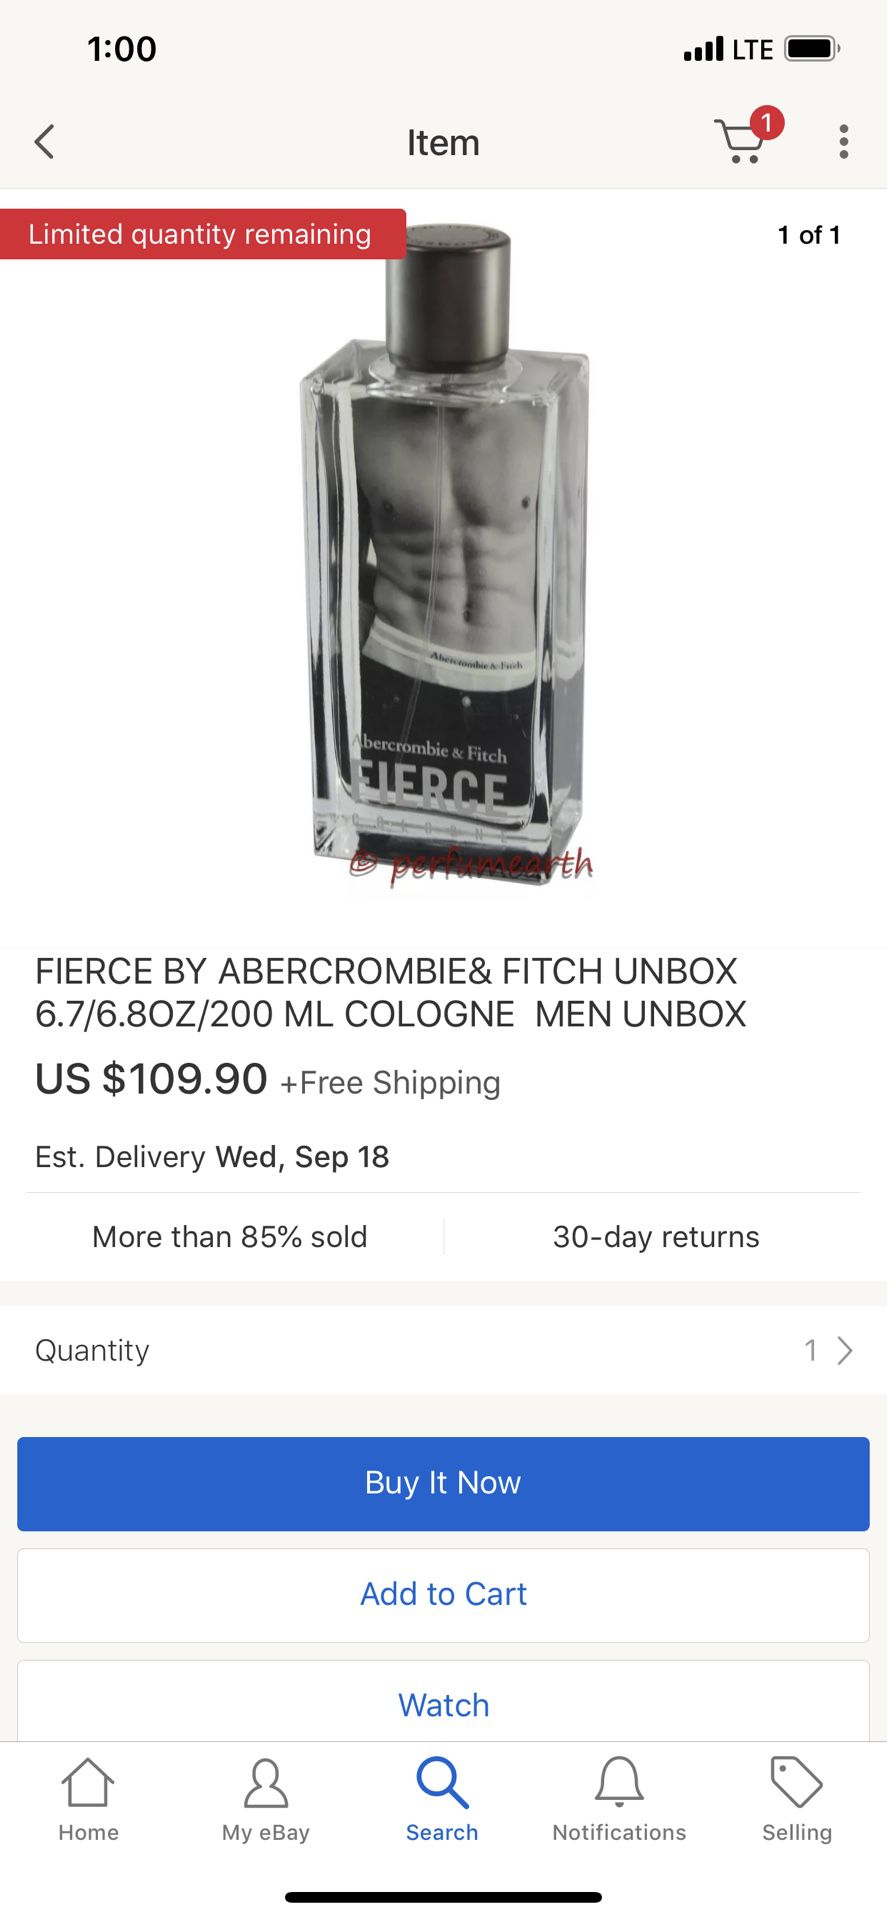 FIERCE BY ABERCROMBIE& FITCH UNBOX 6.7/{link removed} ML COLOGNE MEN UNBOX